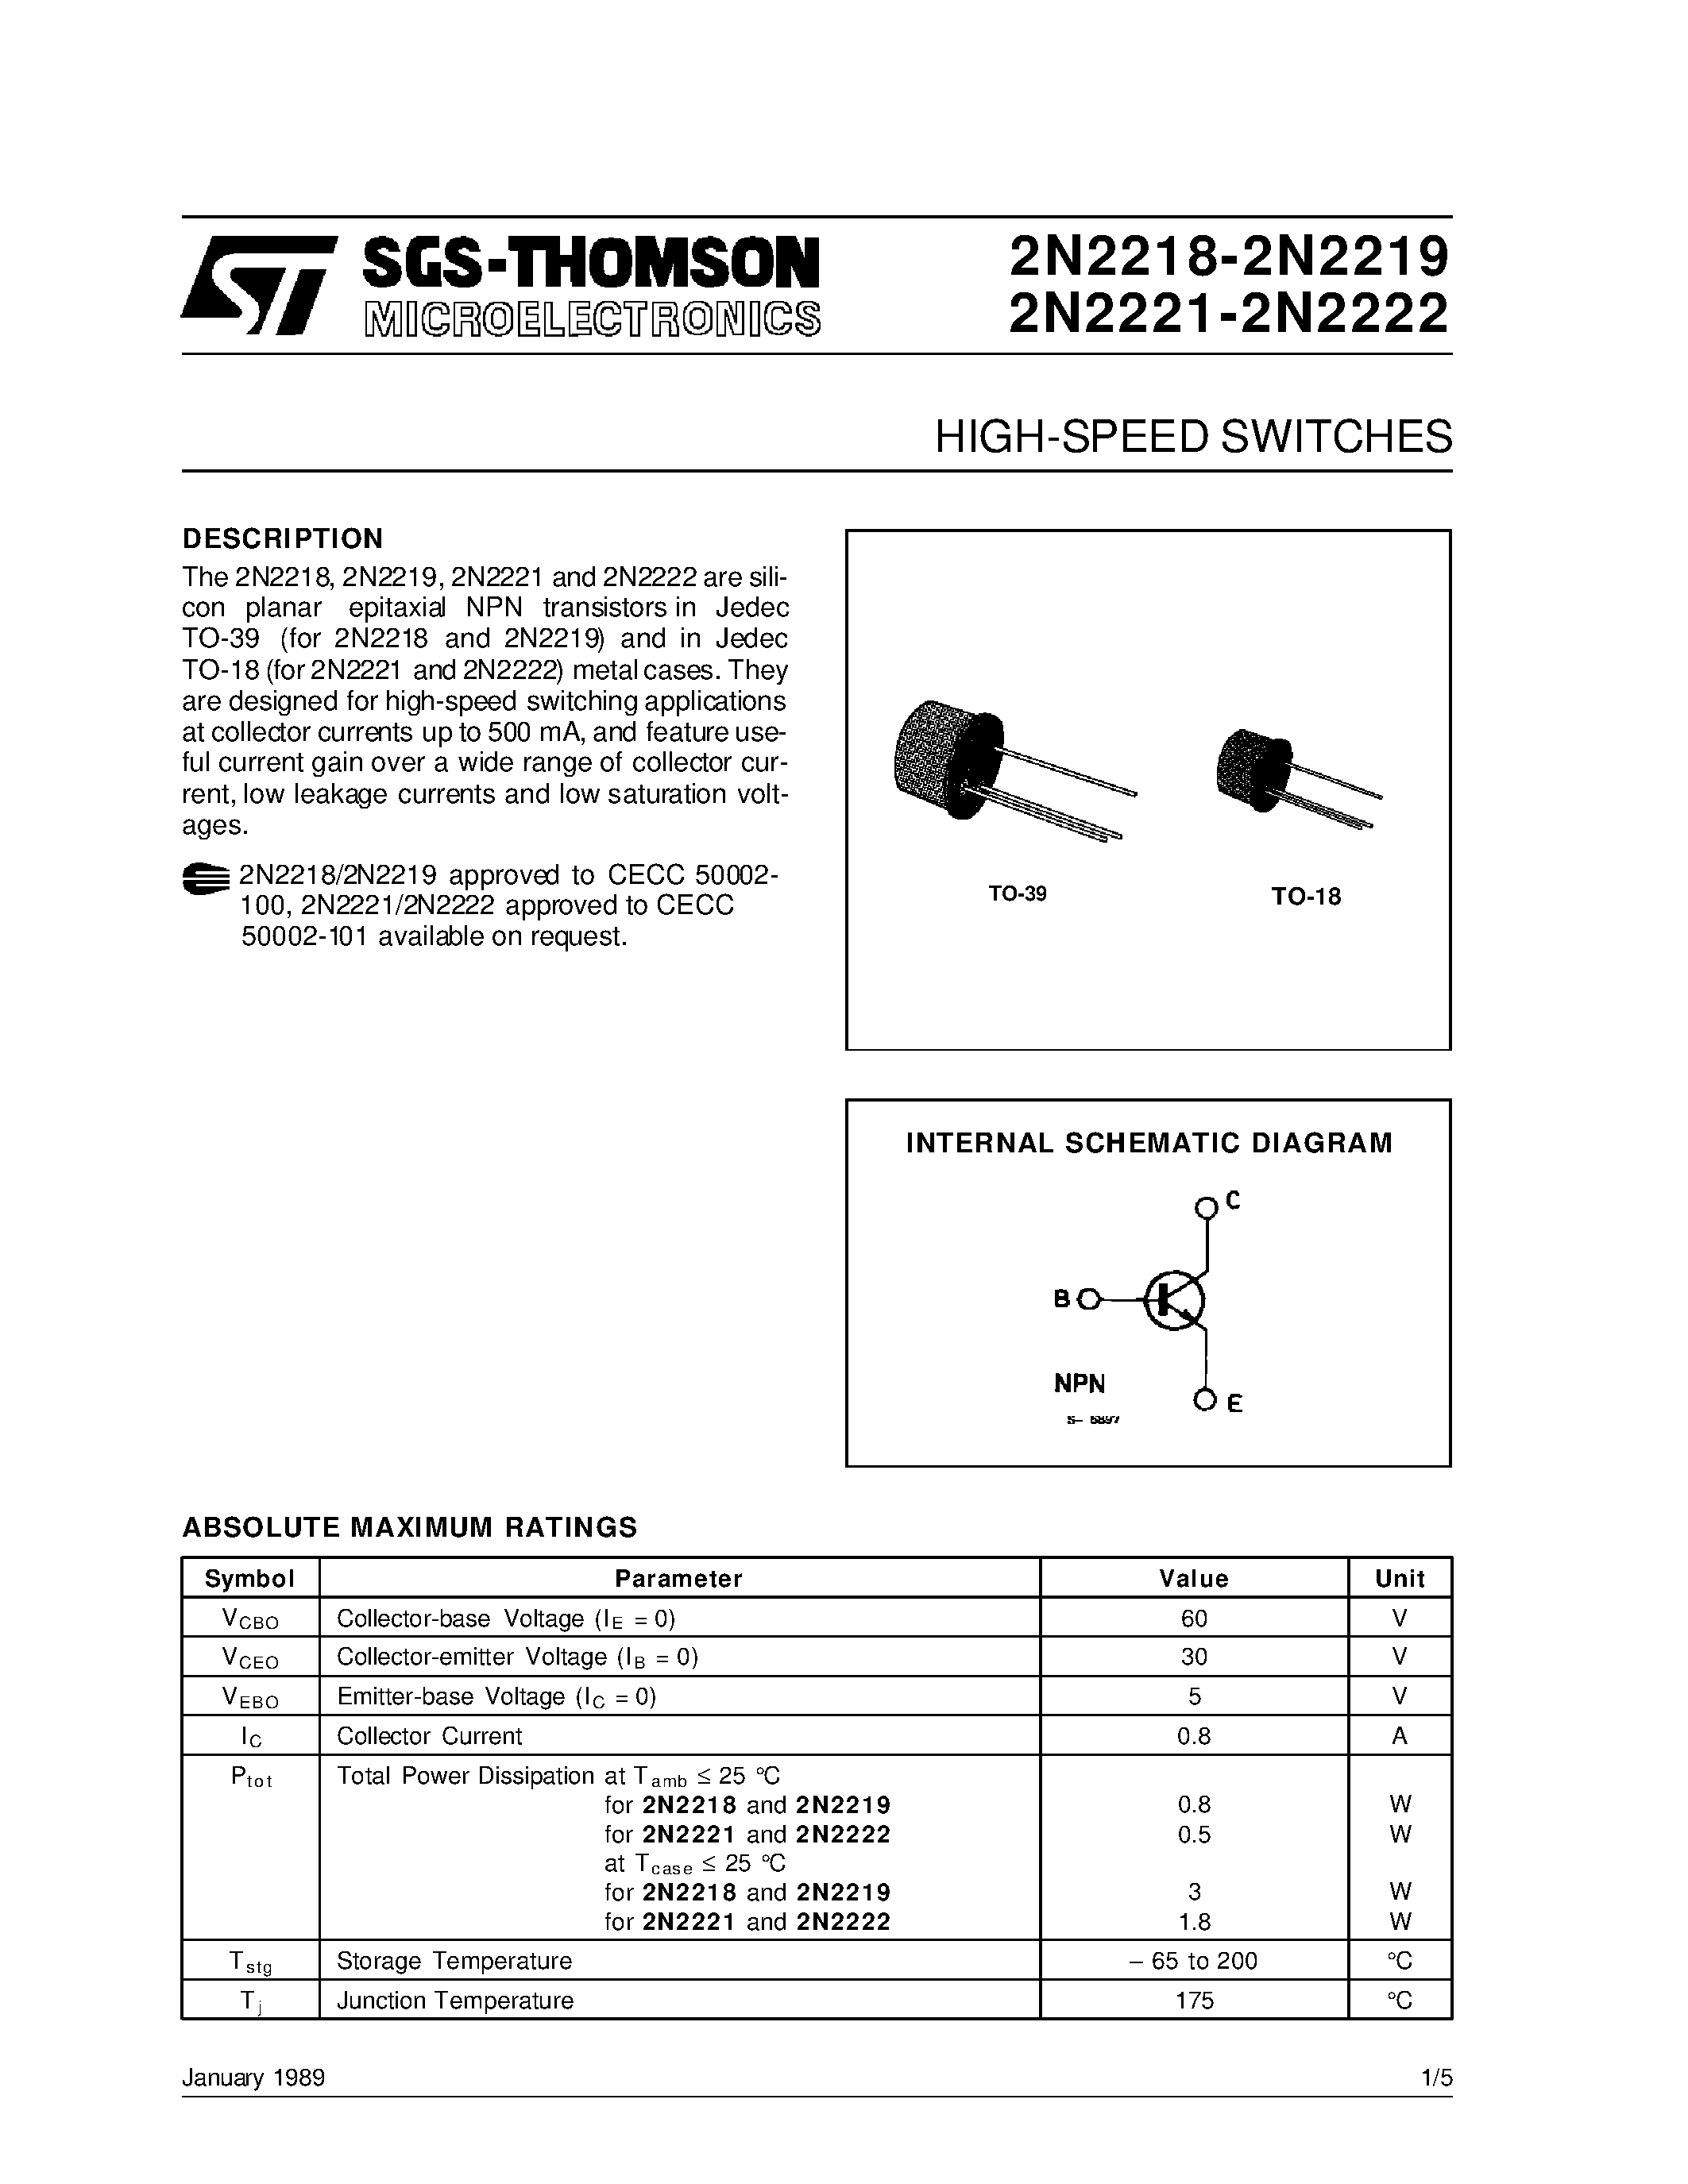 Datasheet 2N2218-2N2219 - HIGH-SPEED SWITCHES page 1